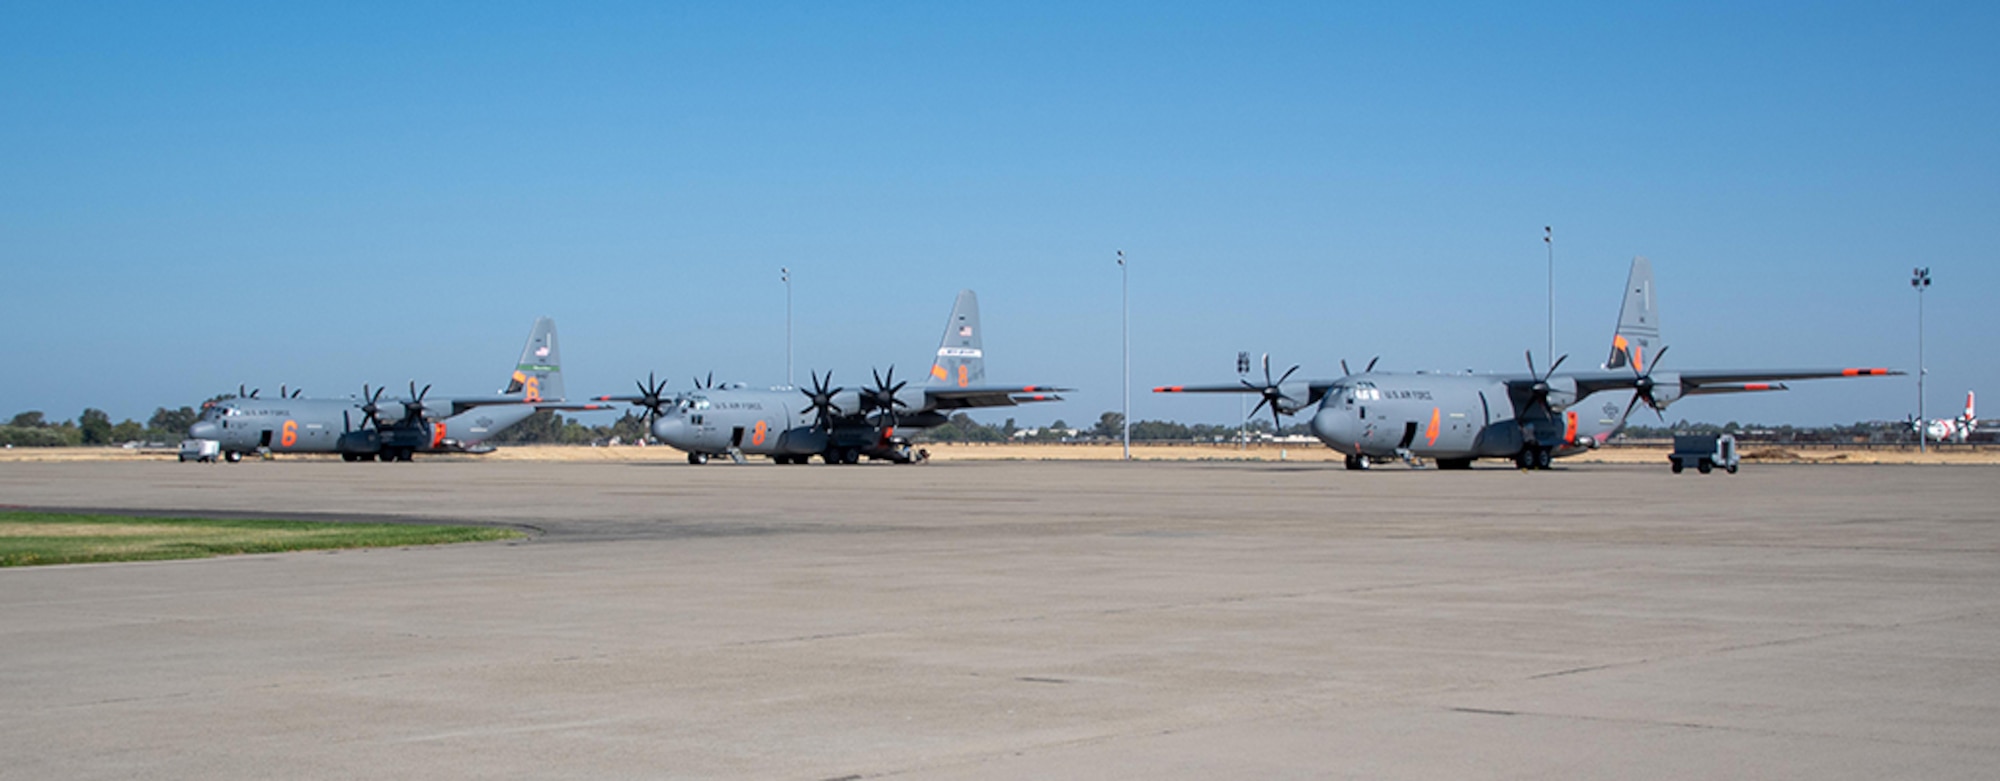 Three Air National Guard C-130s await launch orders July 14, 2021, at CAL FIRE Air Tanker Base, McClellan Park, Calif. The Department of Defense, through the commander, U.S. Northern Command (USNORTHCOM), supports the National Interagency Fire Center in wildland firefighting operations.